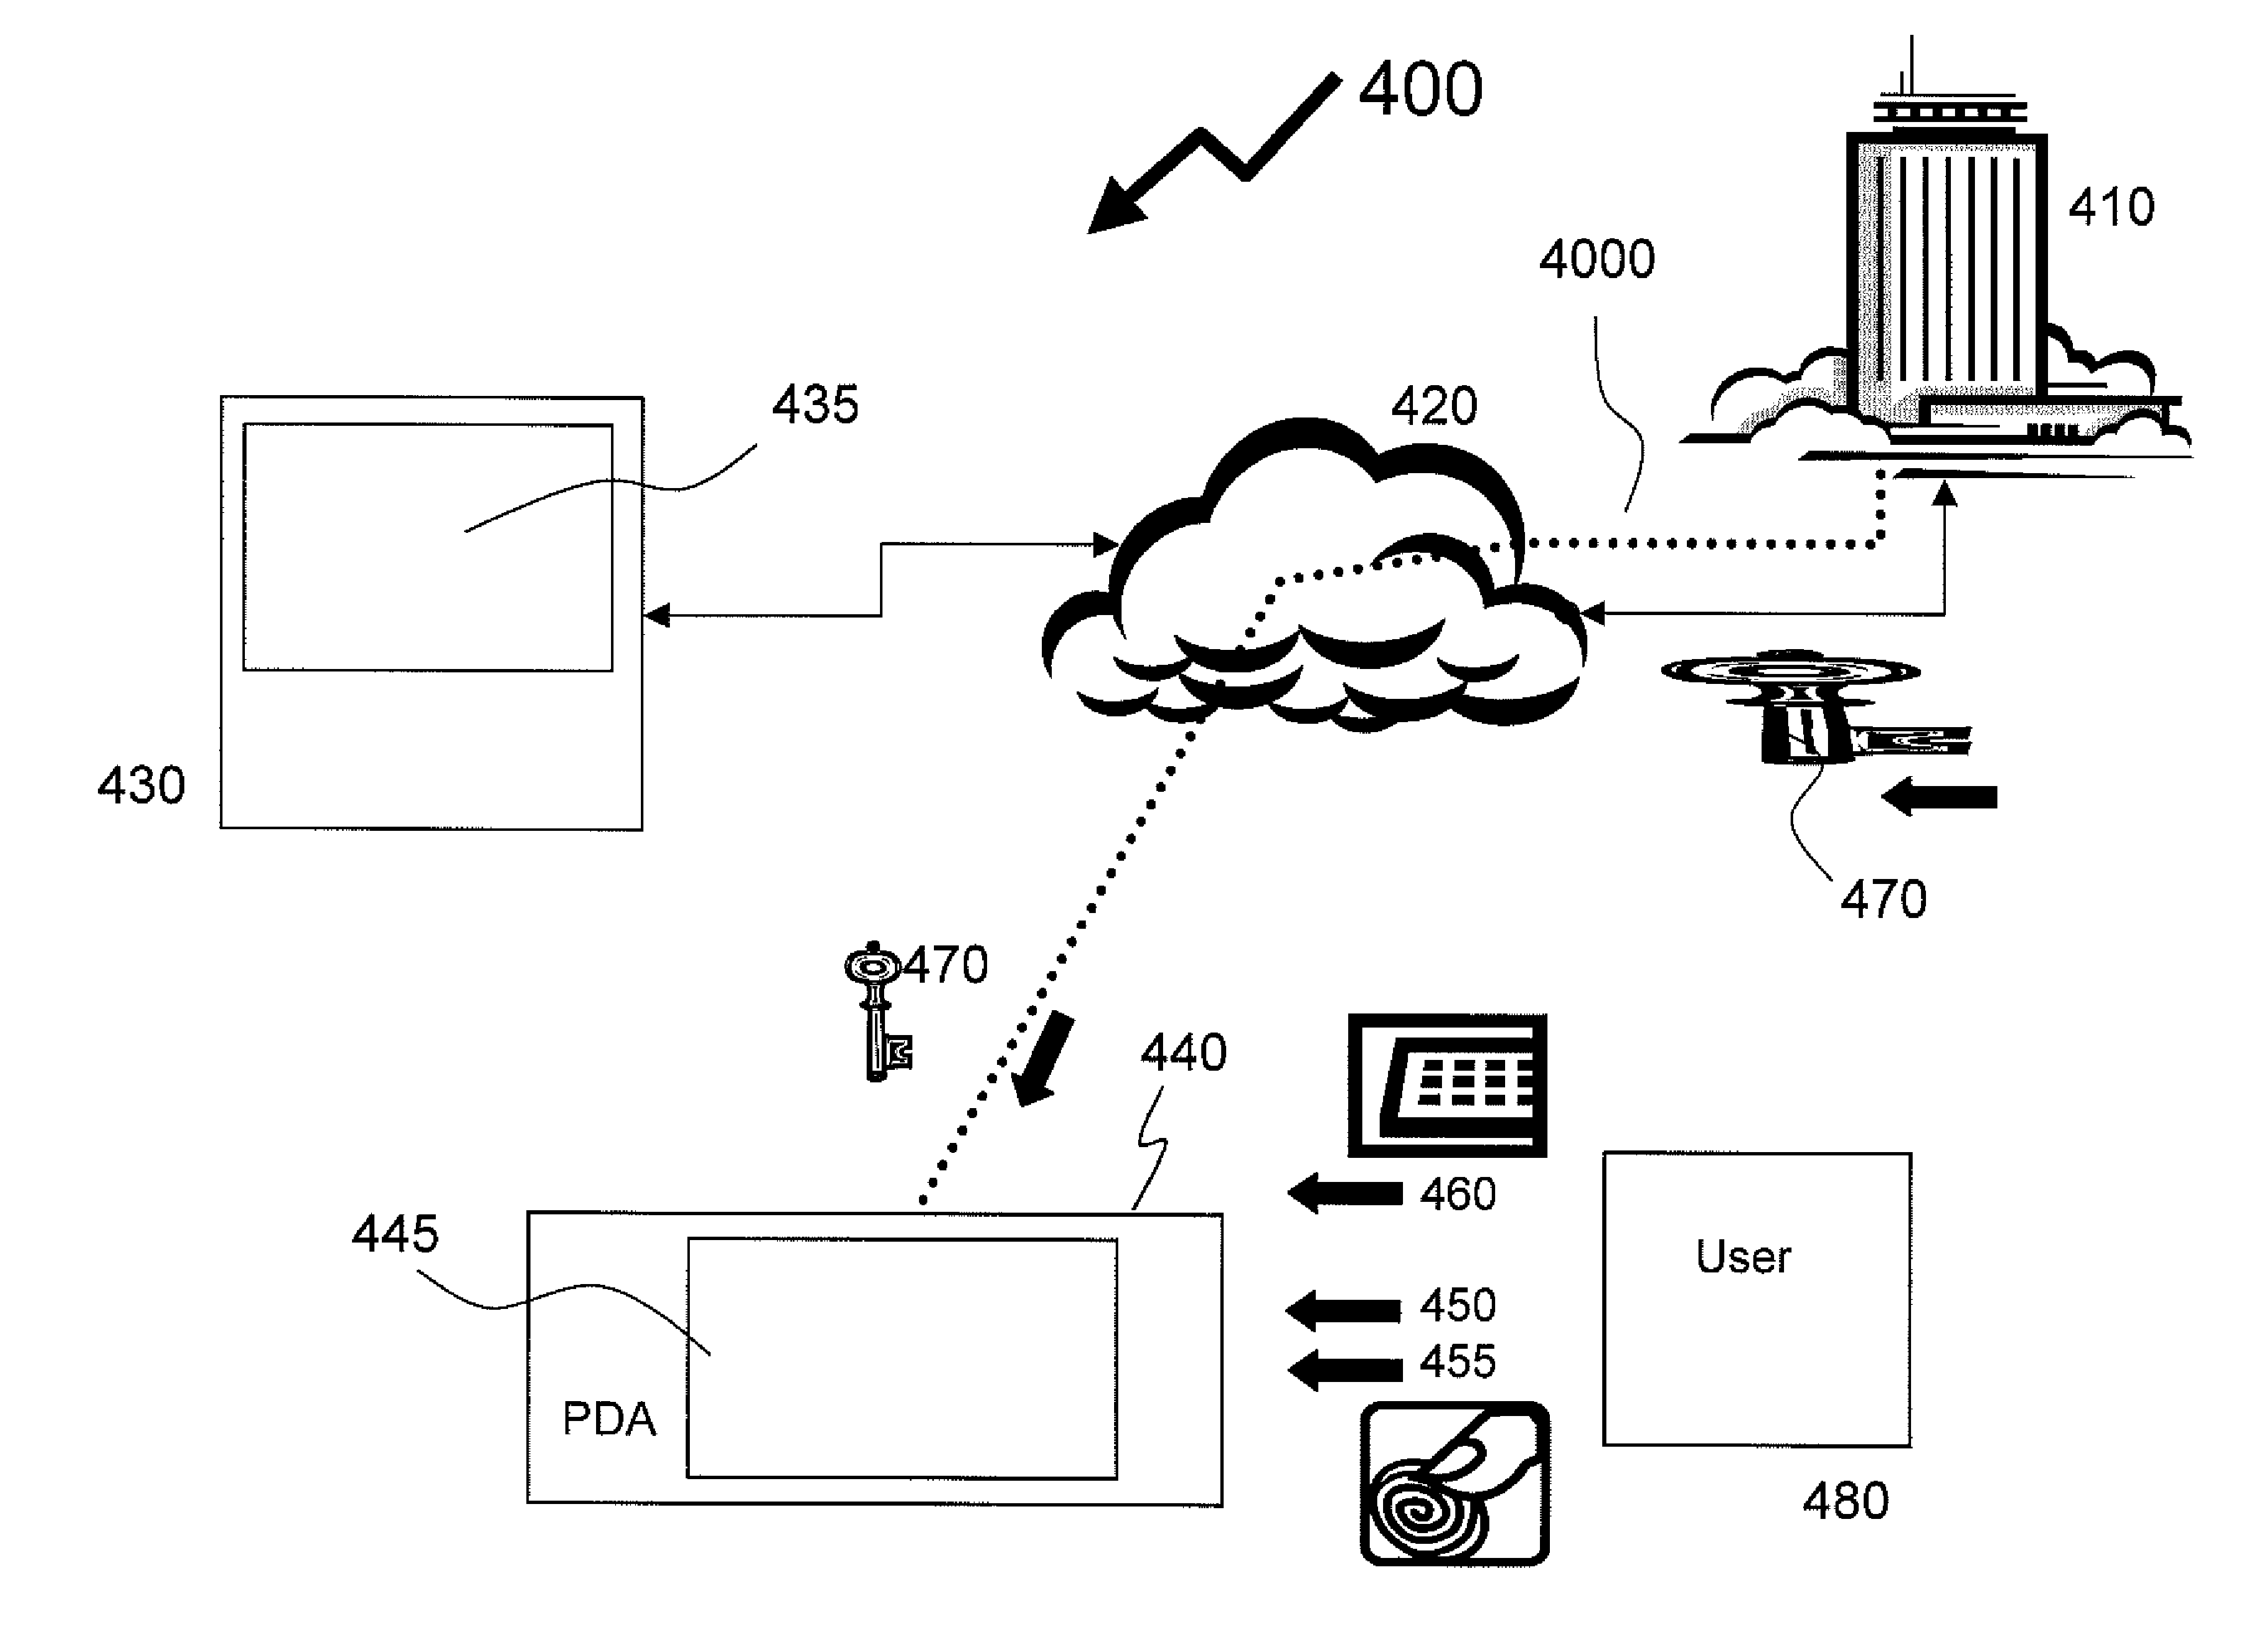 Method of providing assured transactions by watermarked file display verification